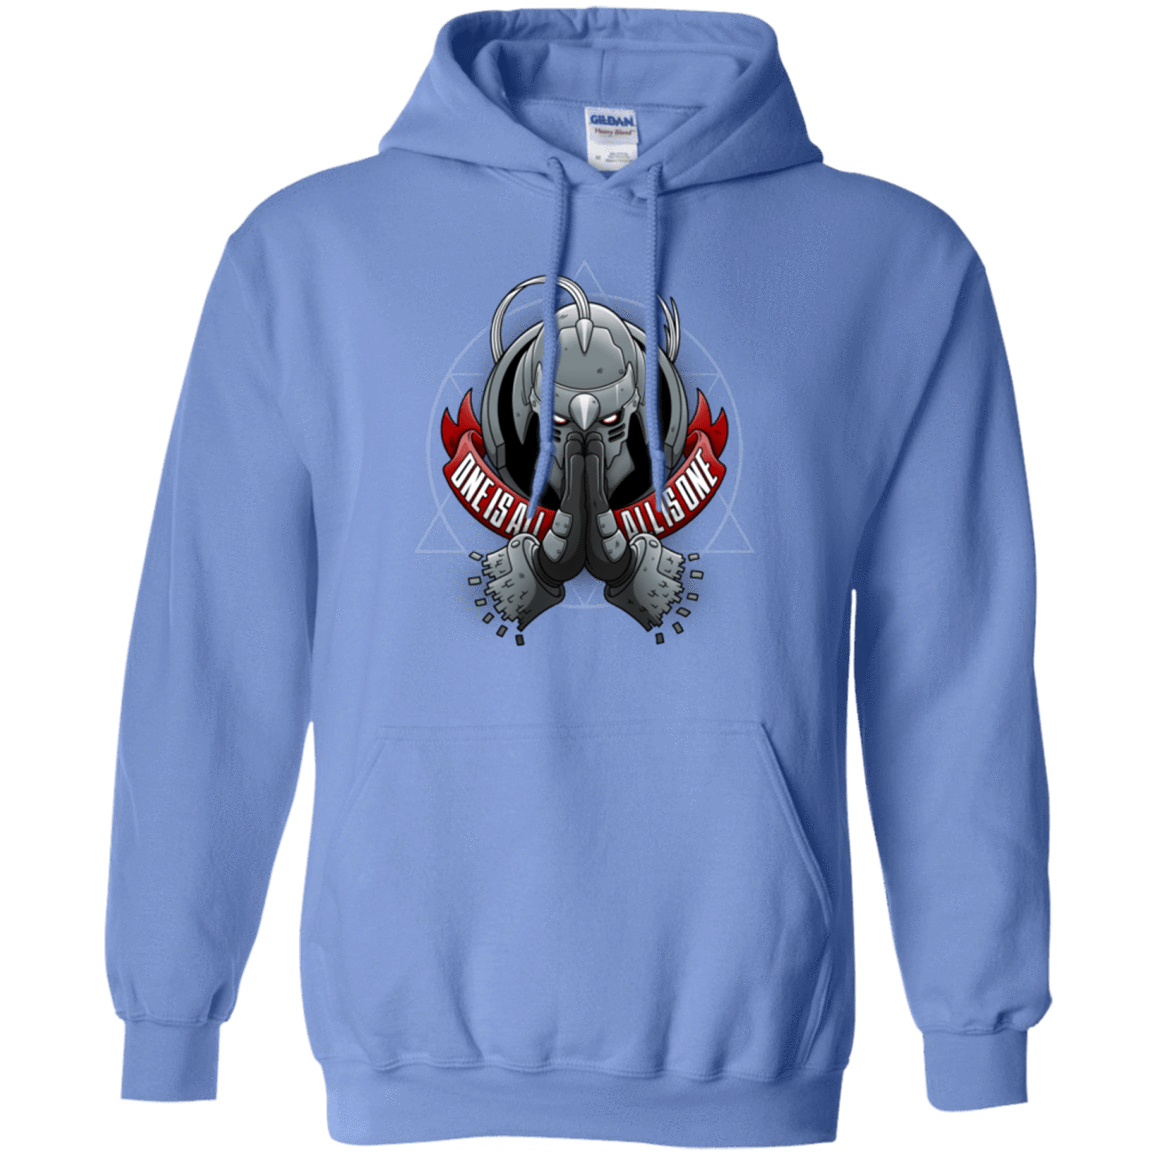 Sweatshirts Carolina Blue / Small ONE IS ALL ALL IS ONE Pullover Hoodie